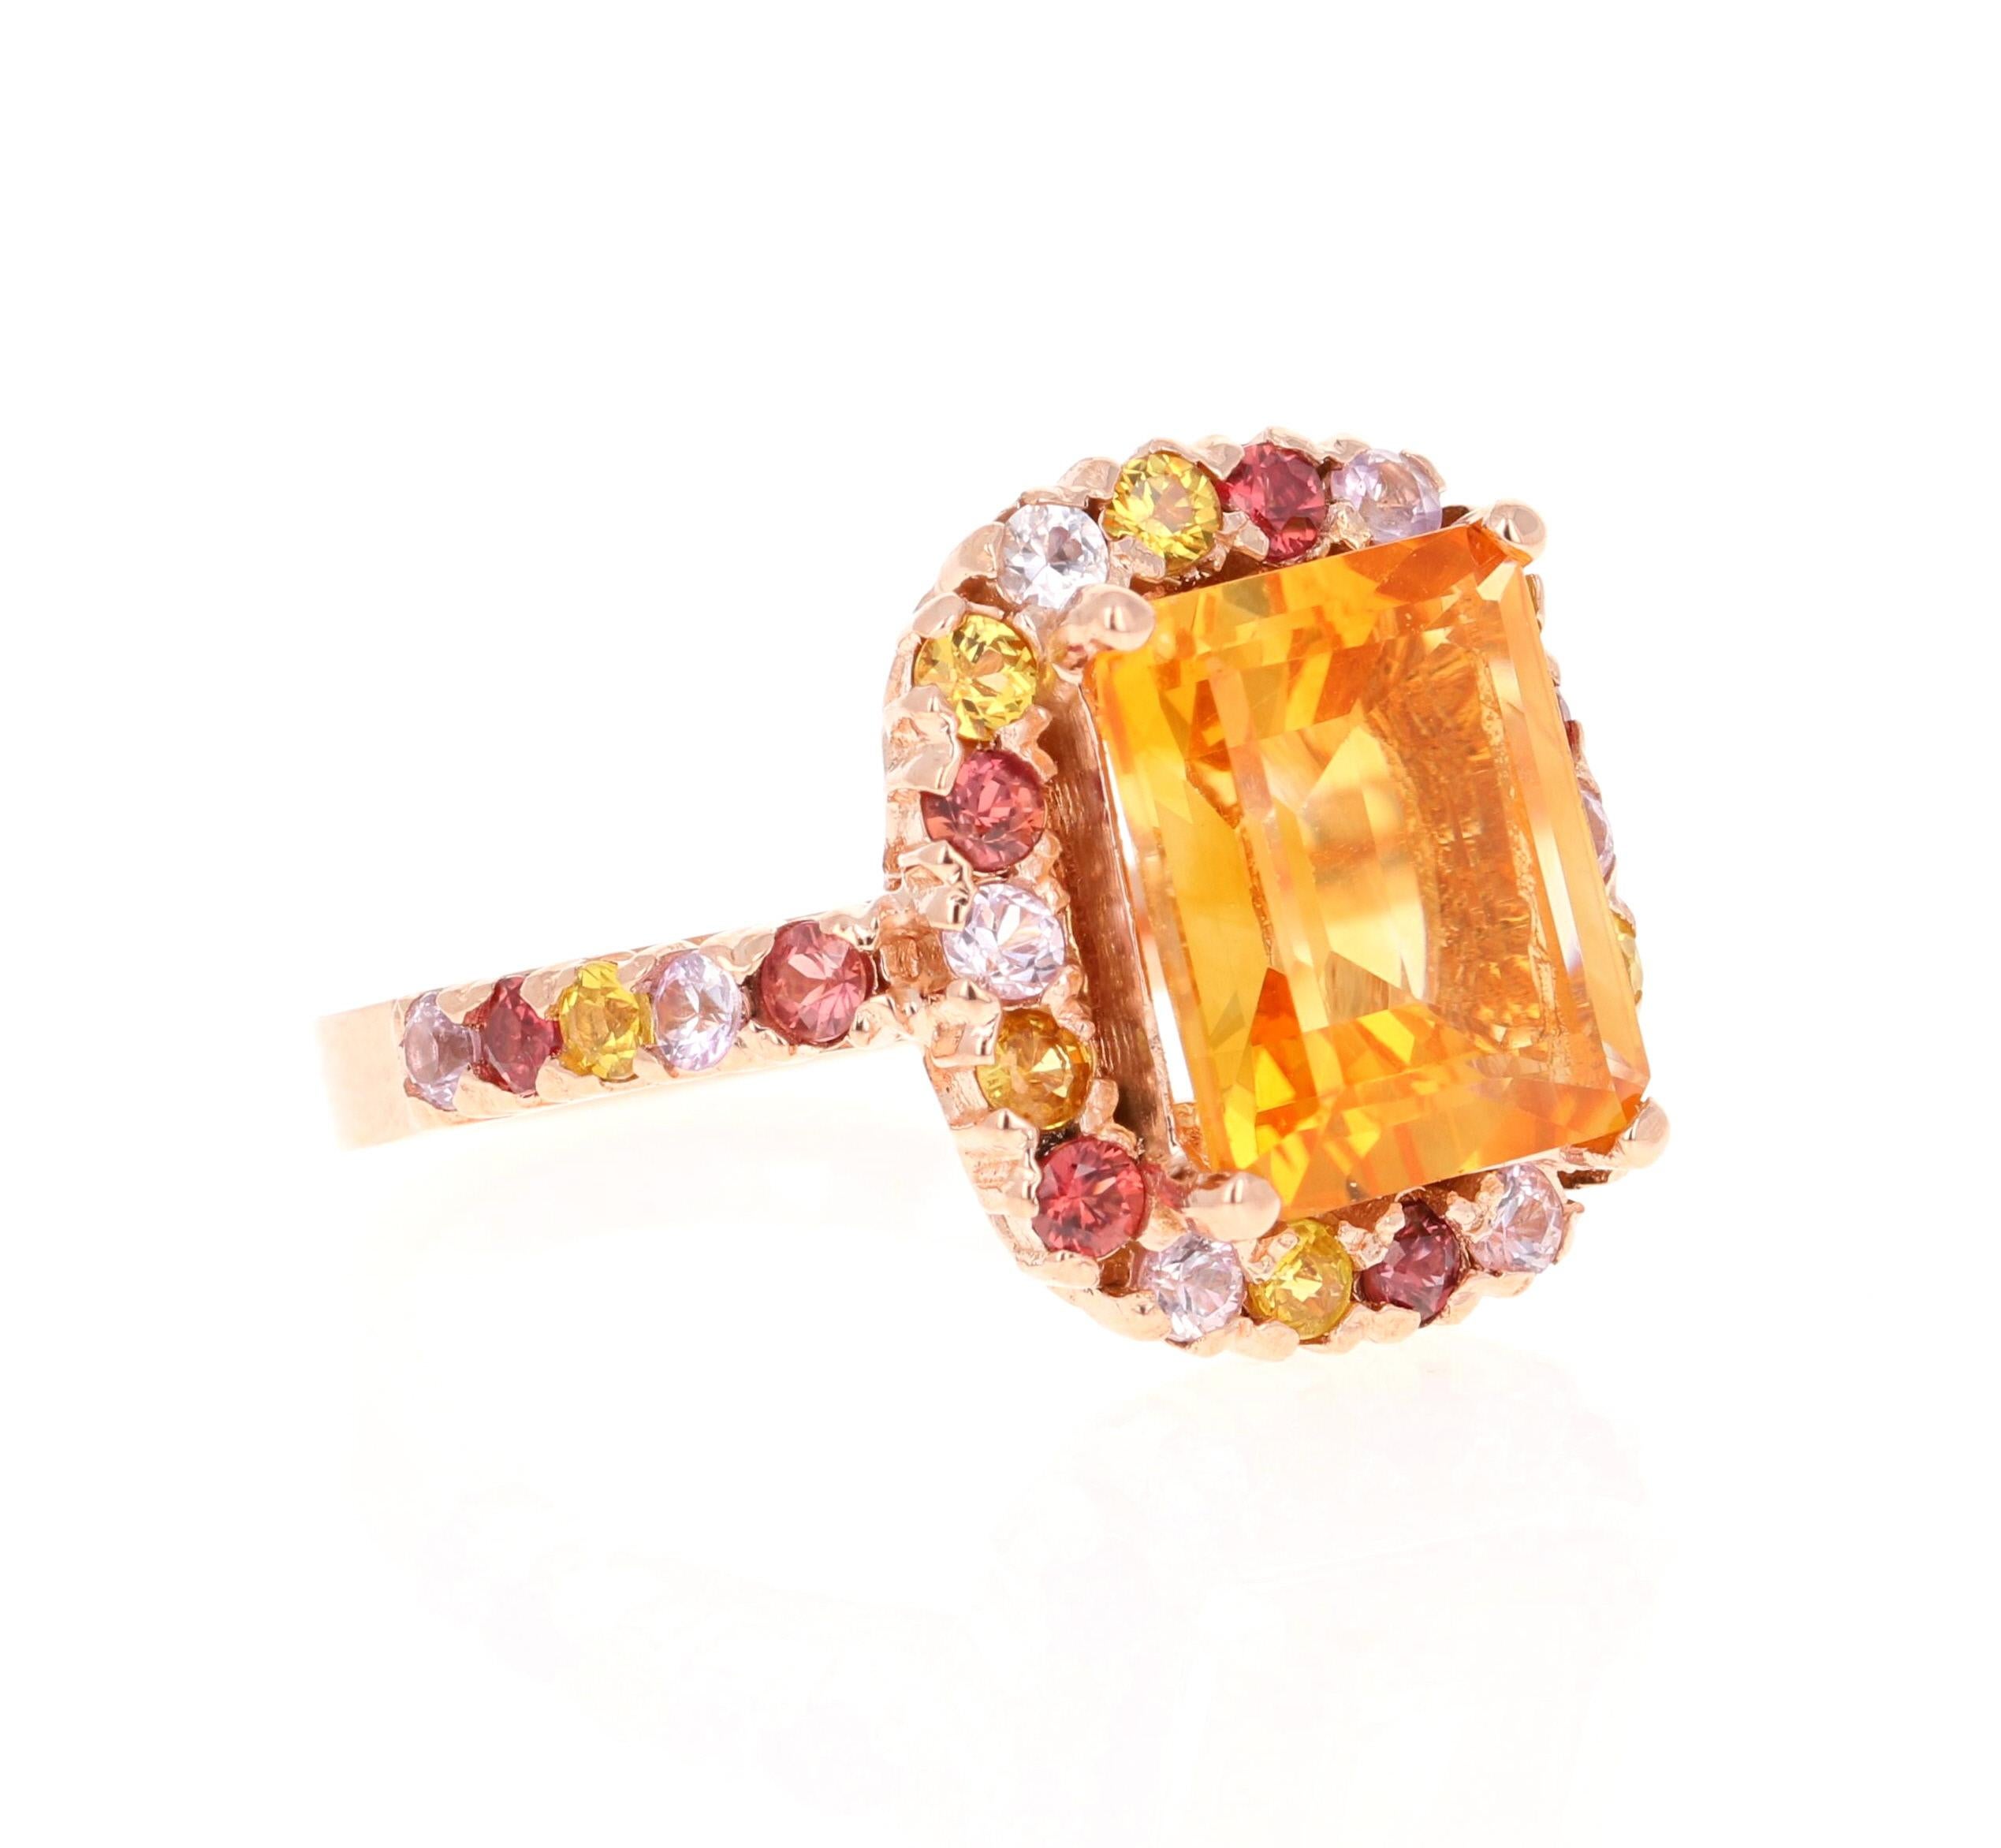 5.29 Carat Emerald Cut Citrine Sapphire Rose Gold Ring

This gorgeous ring has a beautiful Emerald Cut Citrine Quartz weighing 3.79 Carats and is surrounded by a total of 28 Multi Sapphires weighing 1.50 Carats. Each stone is handpicked and